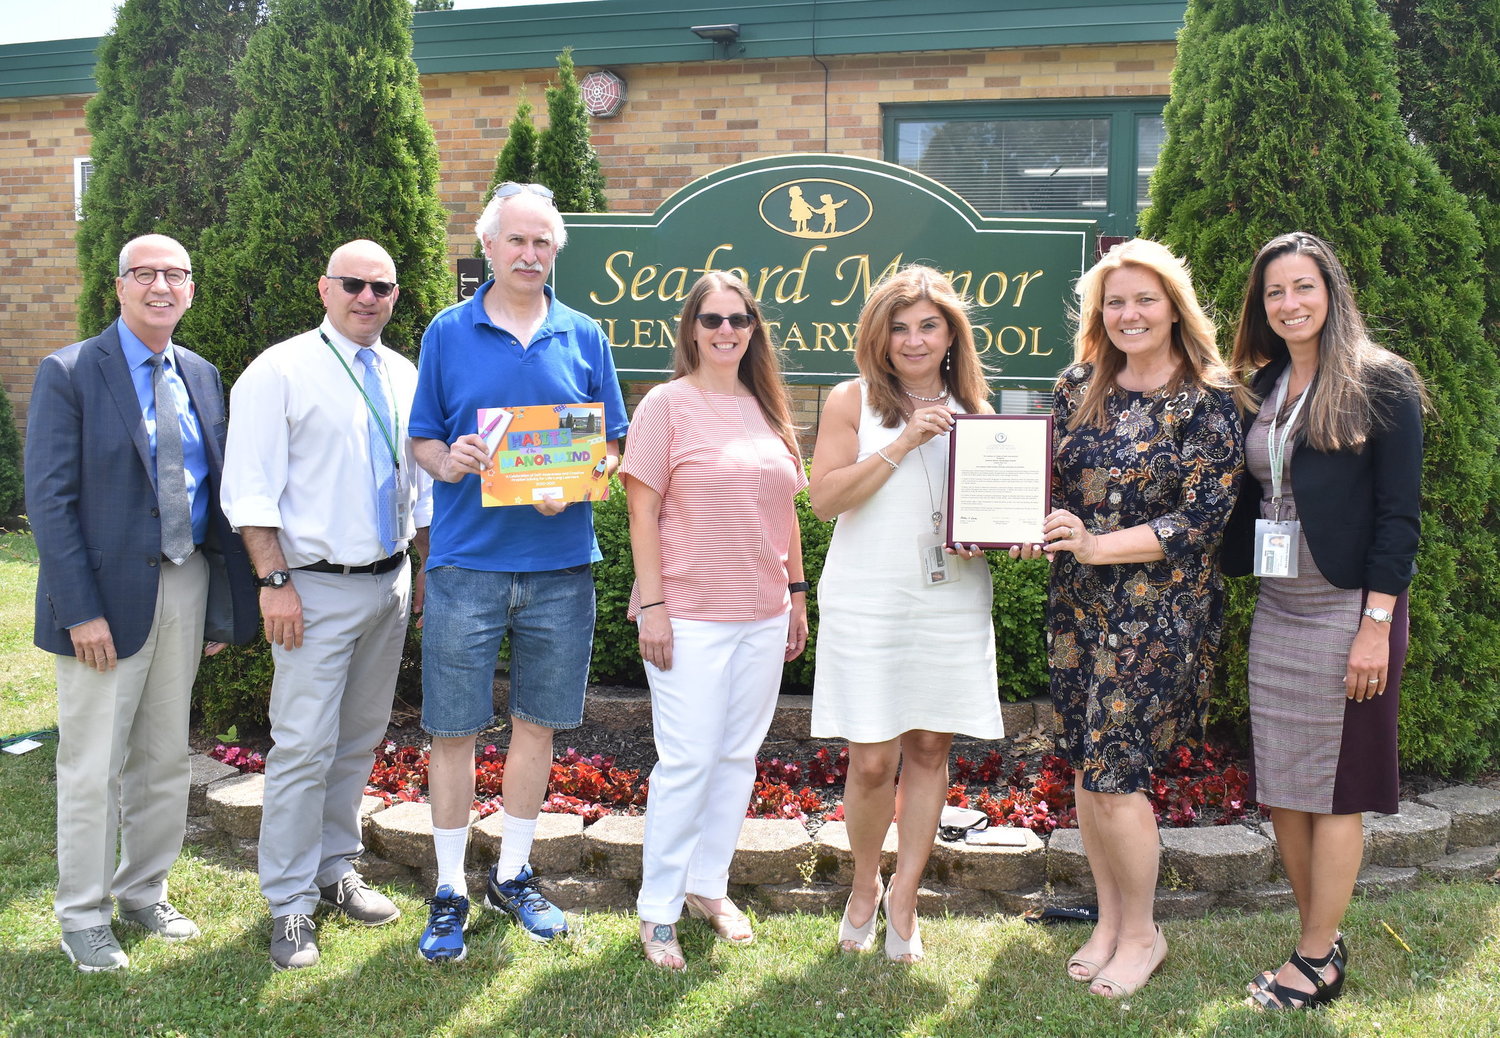 In June 2021, Seaford Manor Elementary School earned distinction as an International Habits of Mind Learning Community of Excellence, recognized by the Institute for Habits of Mind. From left were Director of Humanities Charles Leone, Deputy Superintendent John Striffolino, Board of Education President Bruce Kahn, Trustee Stacie Stark, Superintendent Adele Pecora, Principal Debra Emmerich, and Assistant Principal Mary-Ellen Kakalos.